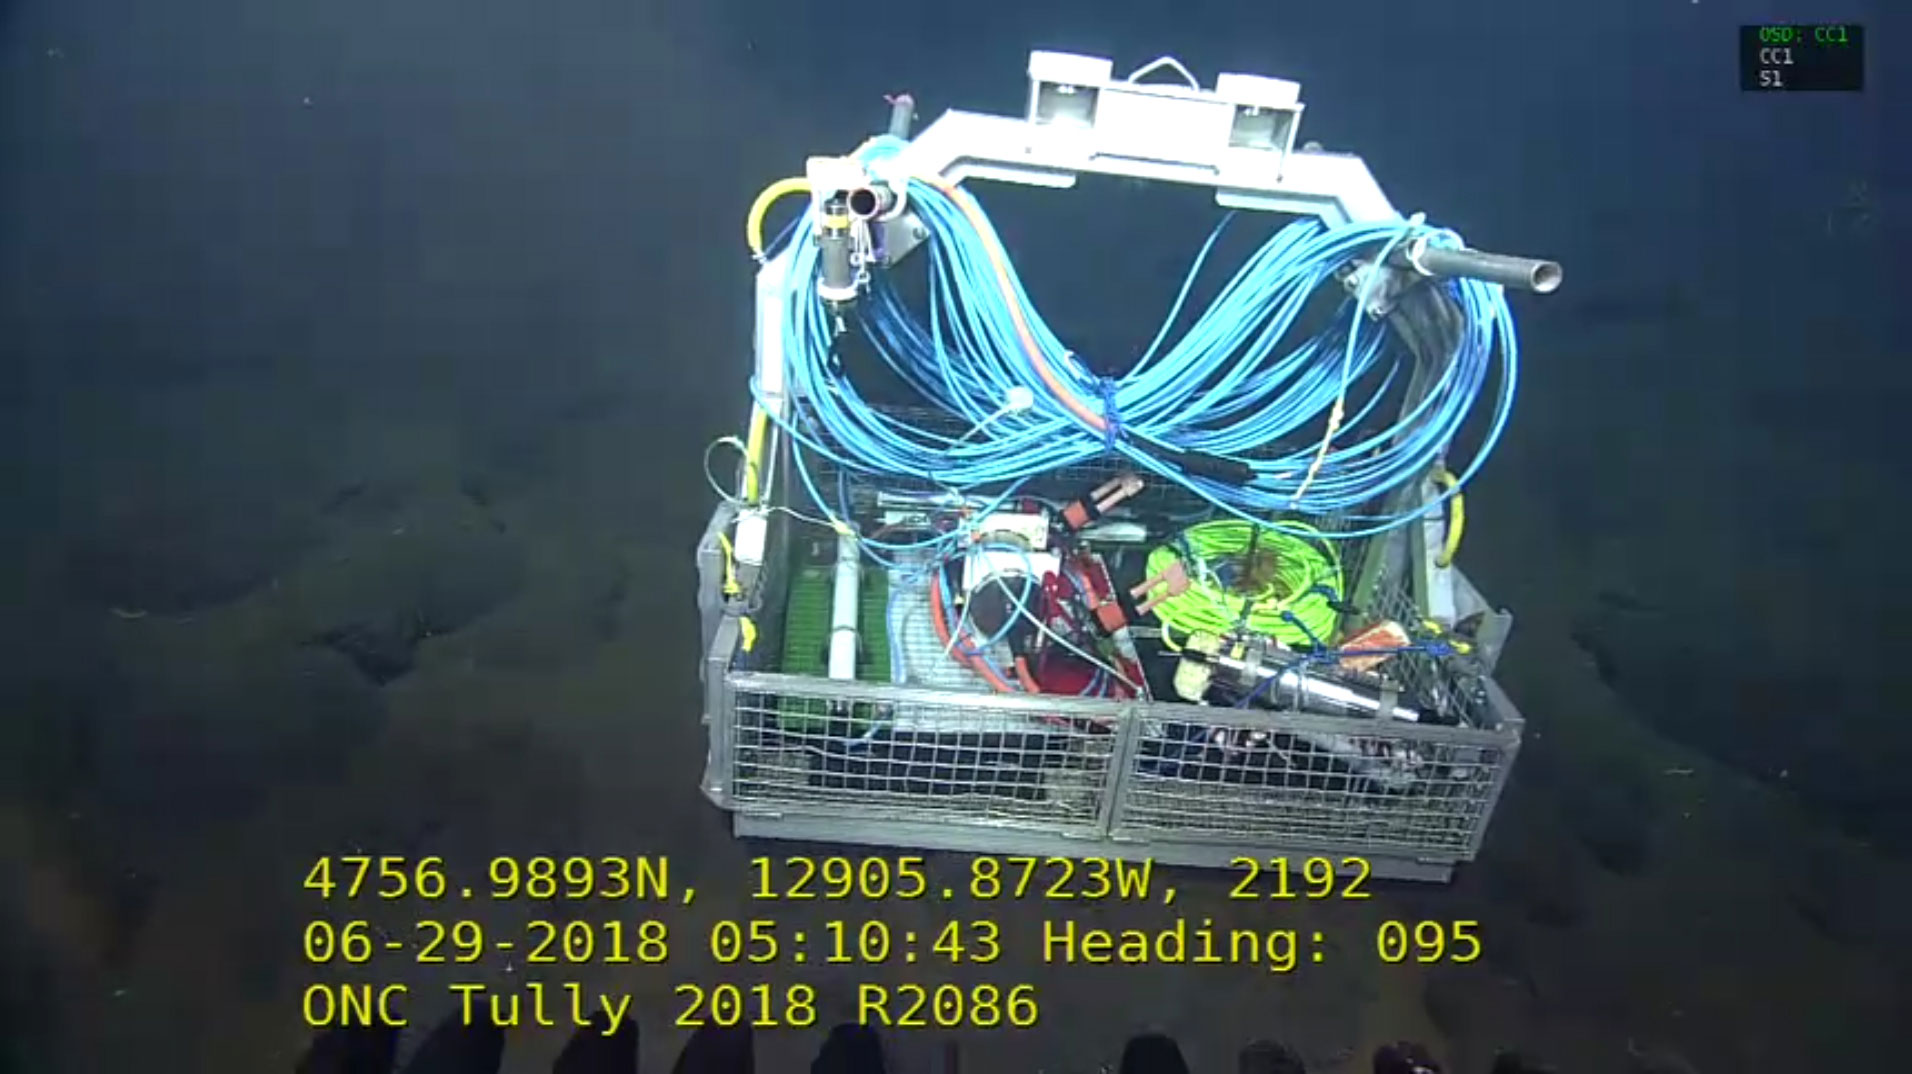 Remotely operated vehicle toolbox containing Maris Ocean Bottom Seismometer, interface unit and cabling